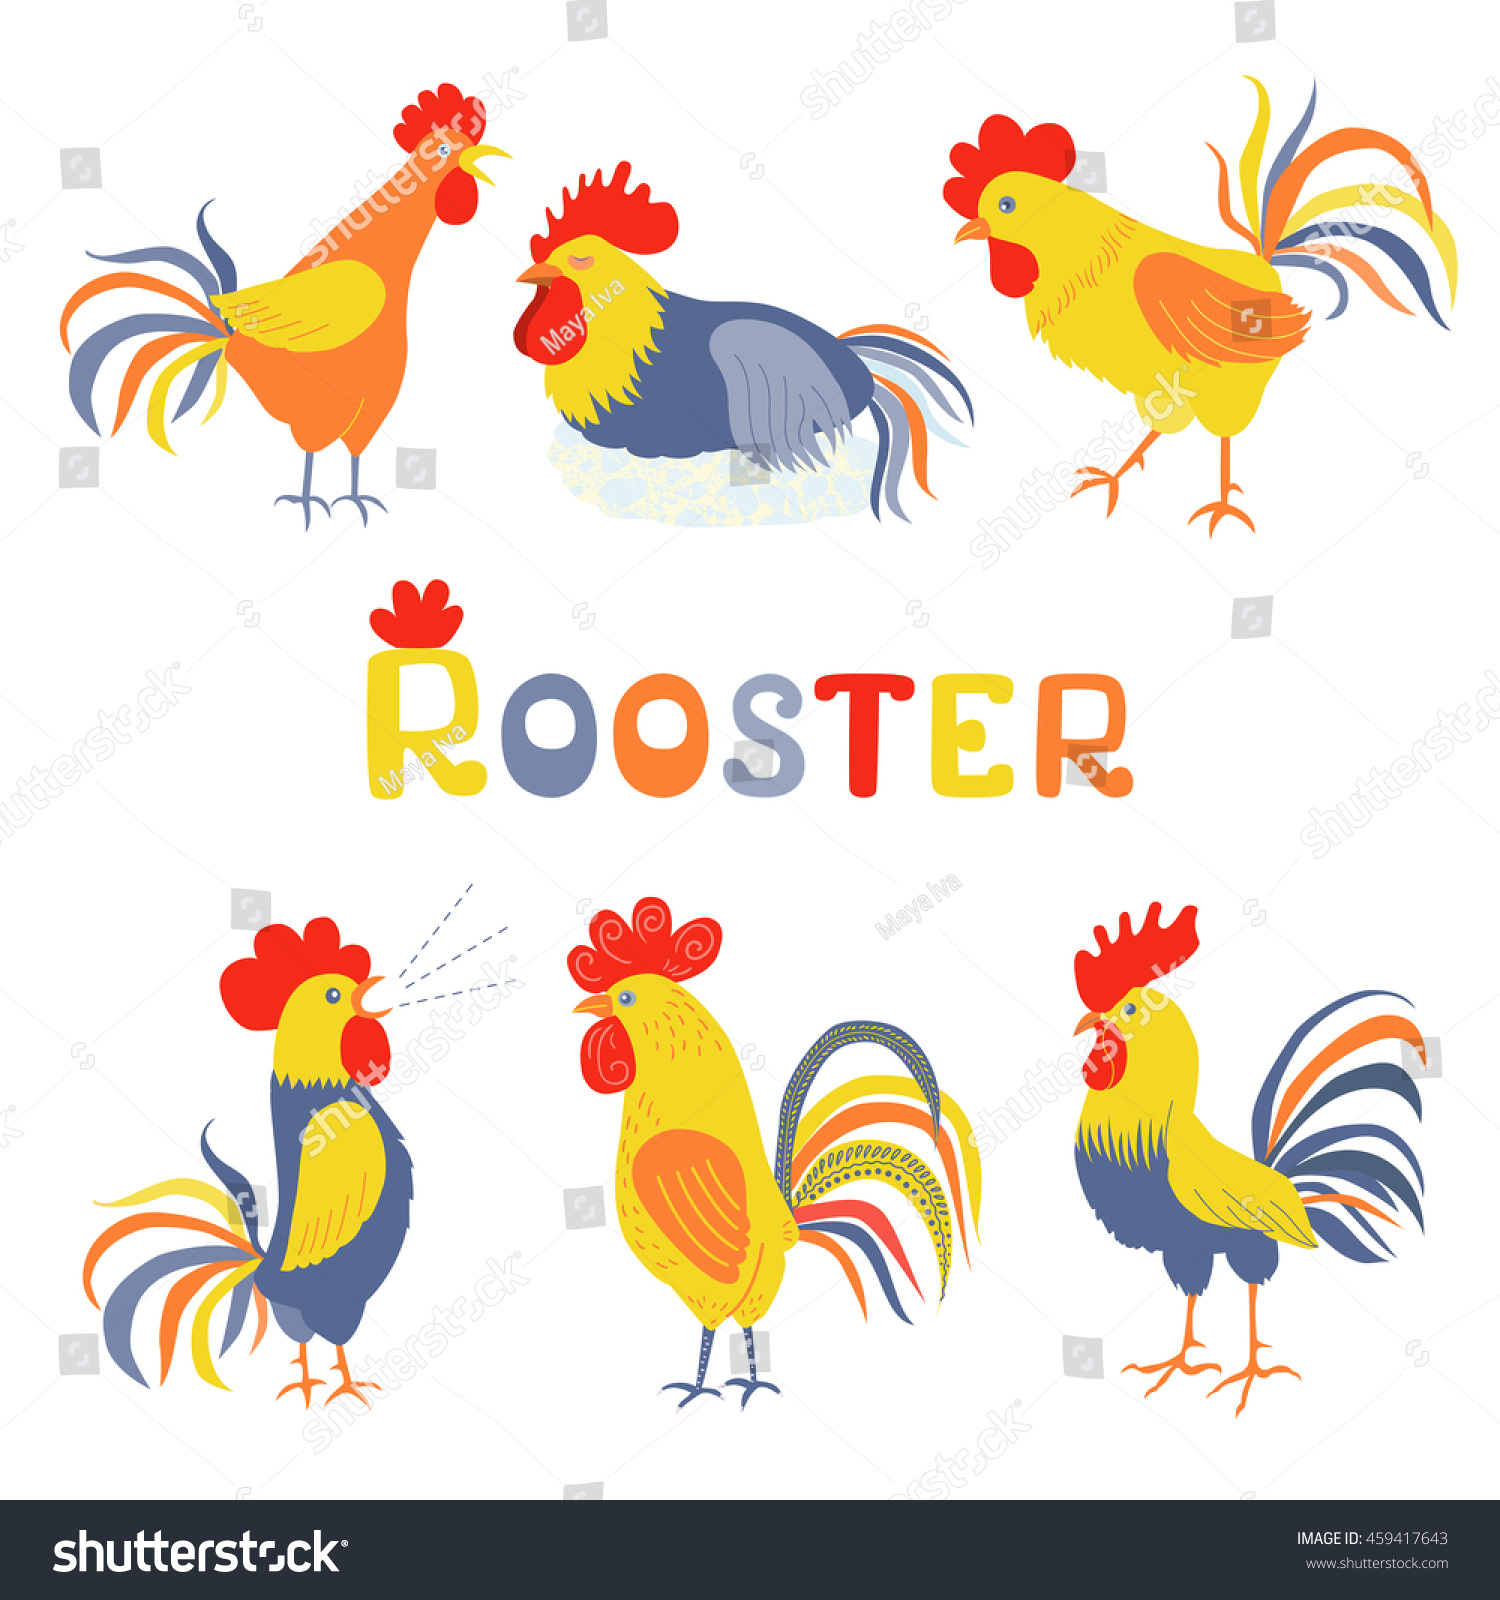 SVG of Six lovely cockerels on a white background. Illustration in flat style. Cocks crowing. Cock-a-doodle-doo. Cockerel slipping. Rooster symbol of Chinese New Year. Lettering is hand drawn svg